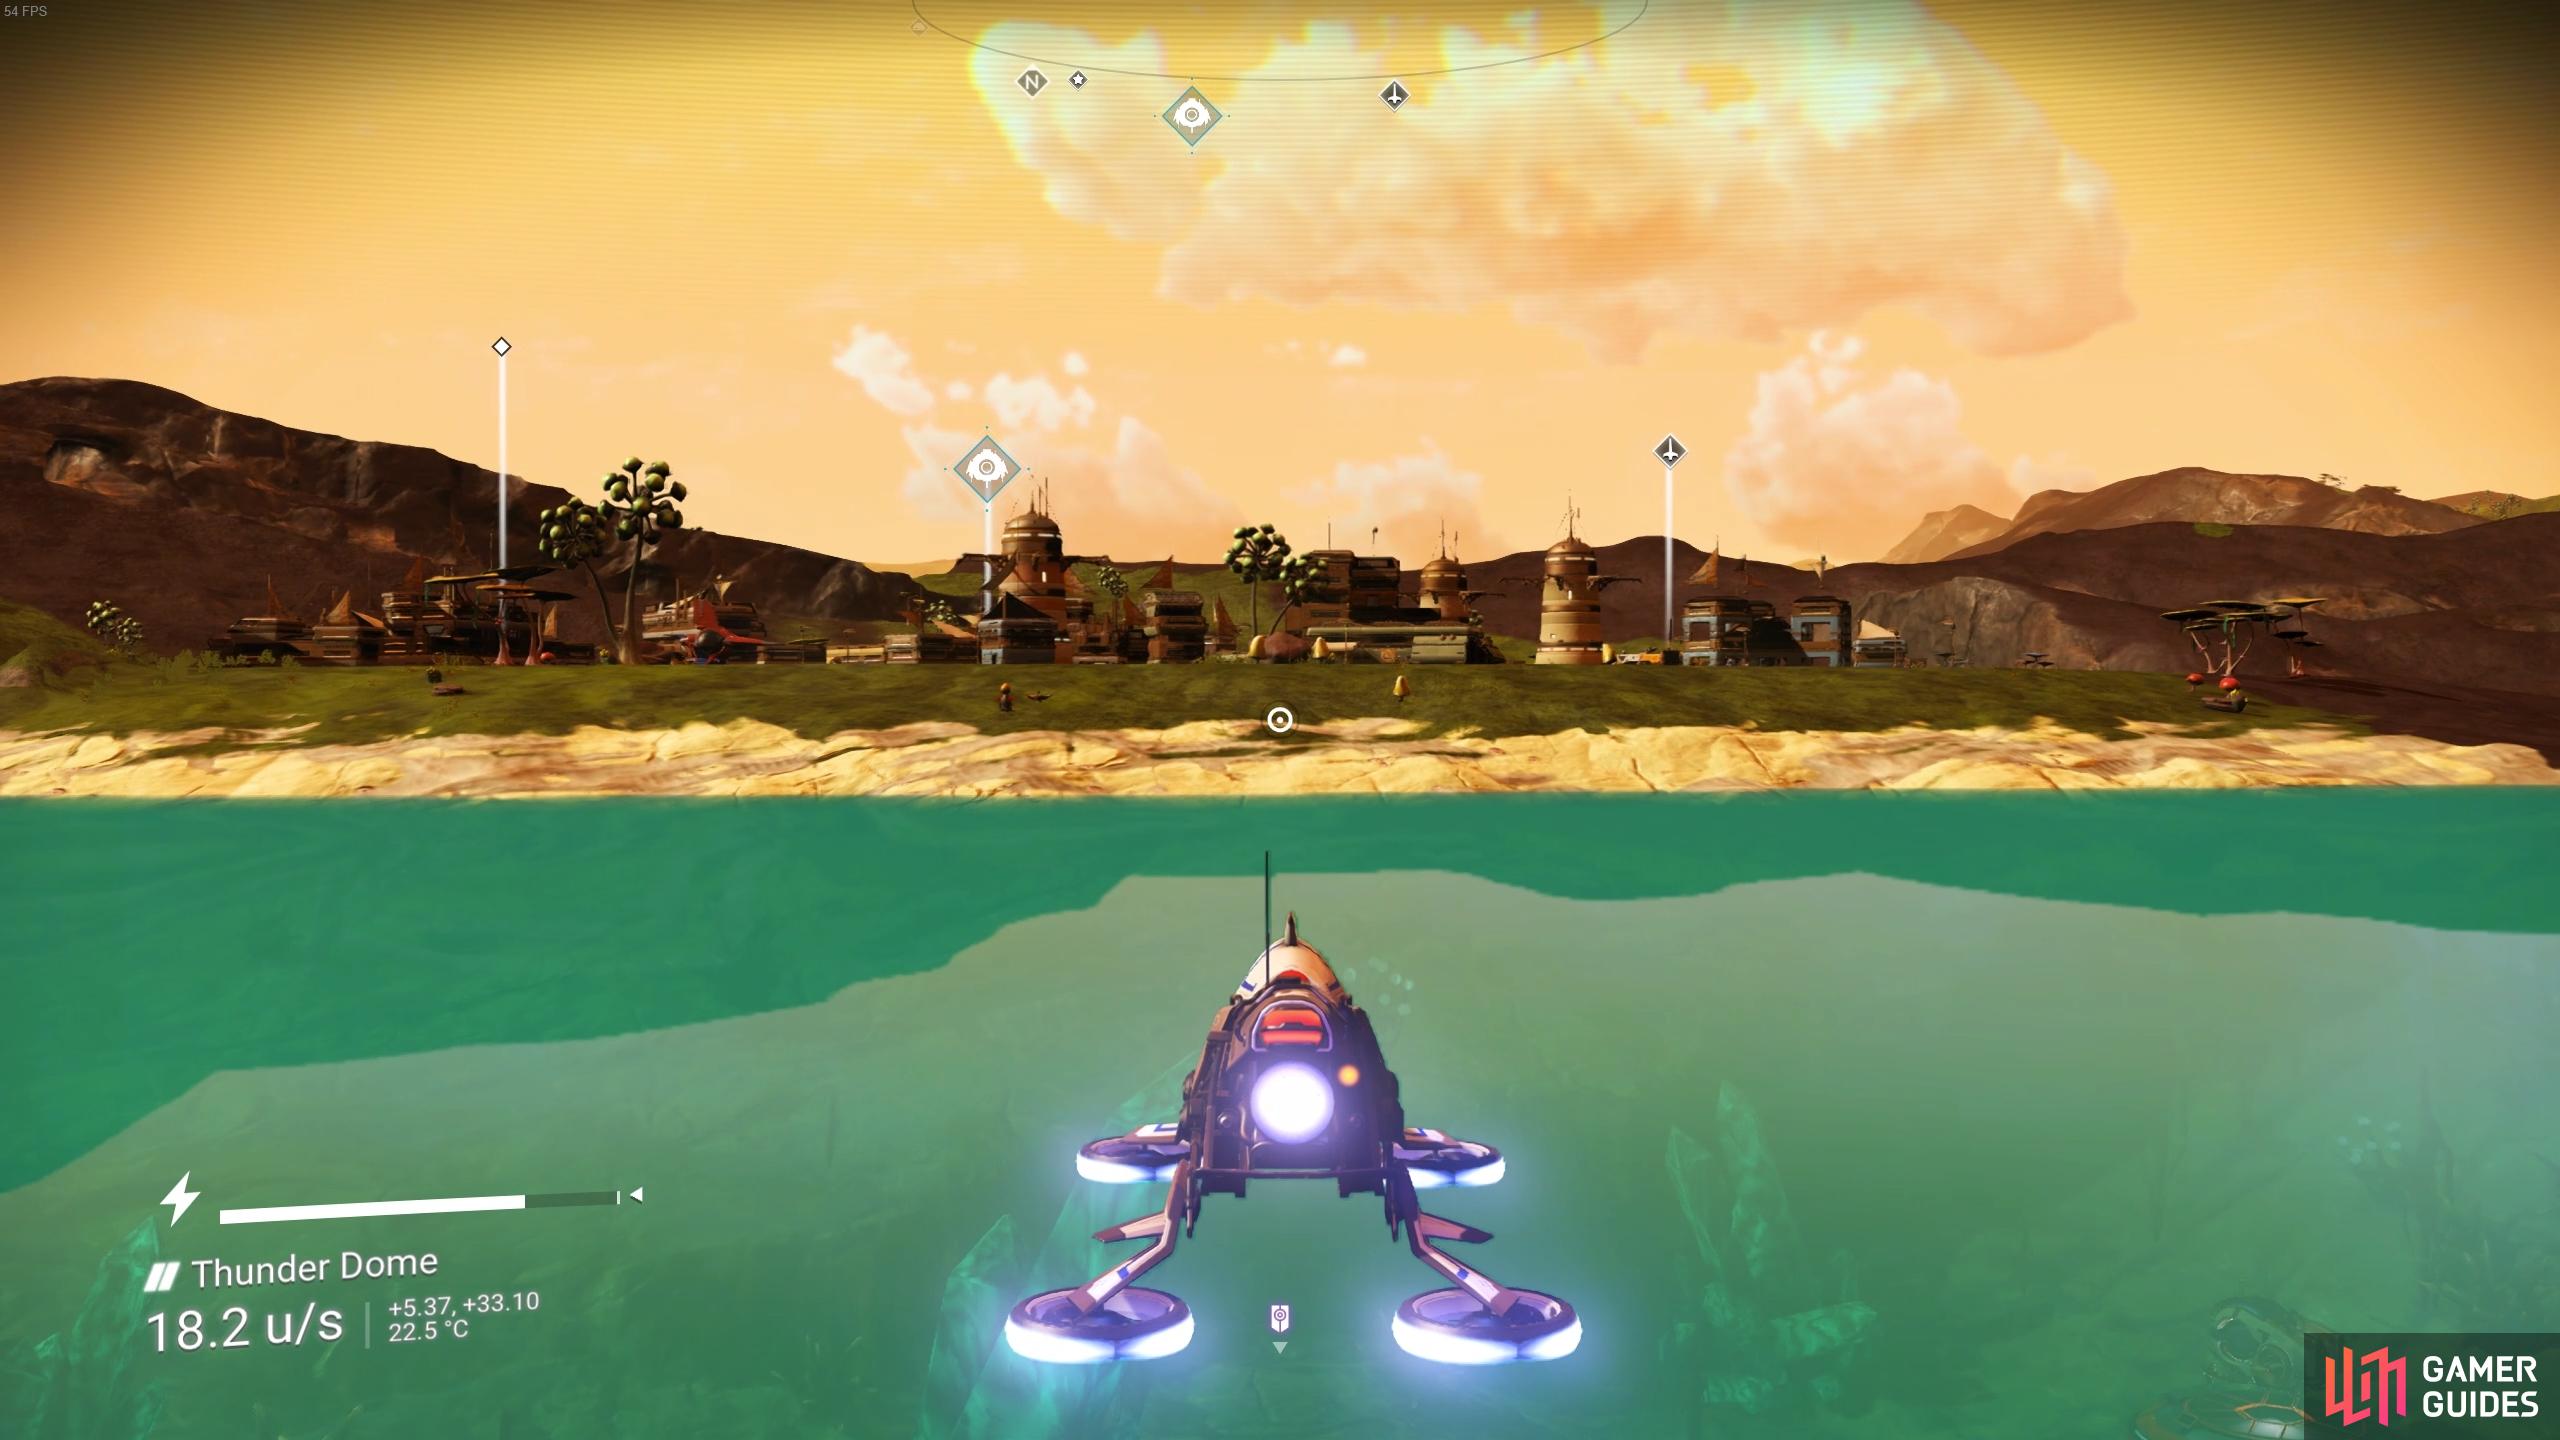 The Nomad can hover over both land and water with ease.